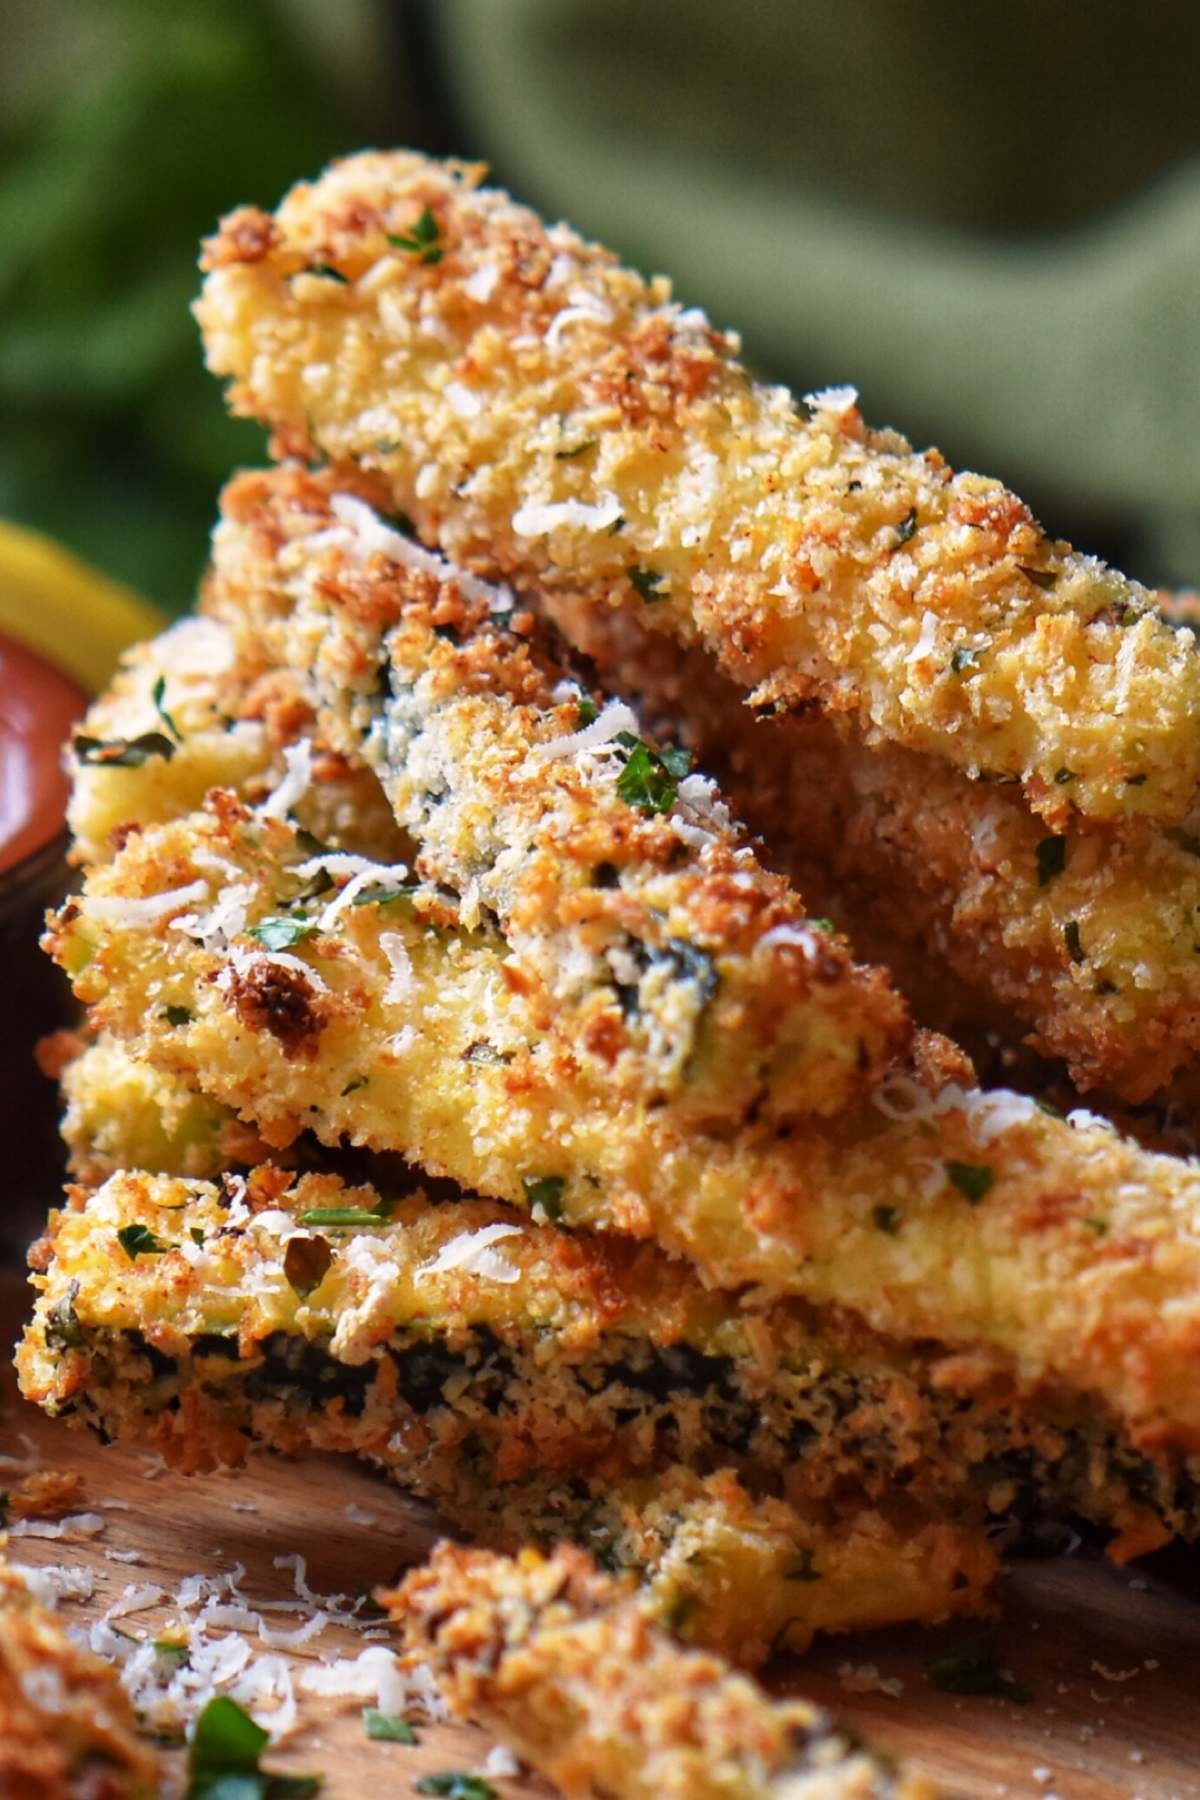 A stack of Air Fryer Parmesan encrusted Zucchini Sticks on a wooden board.